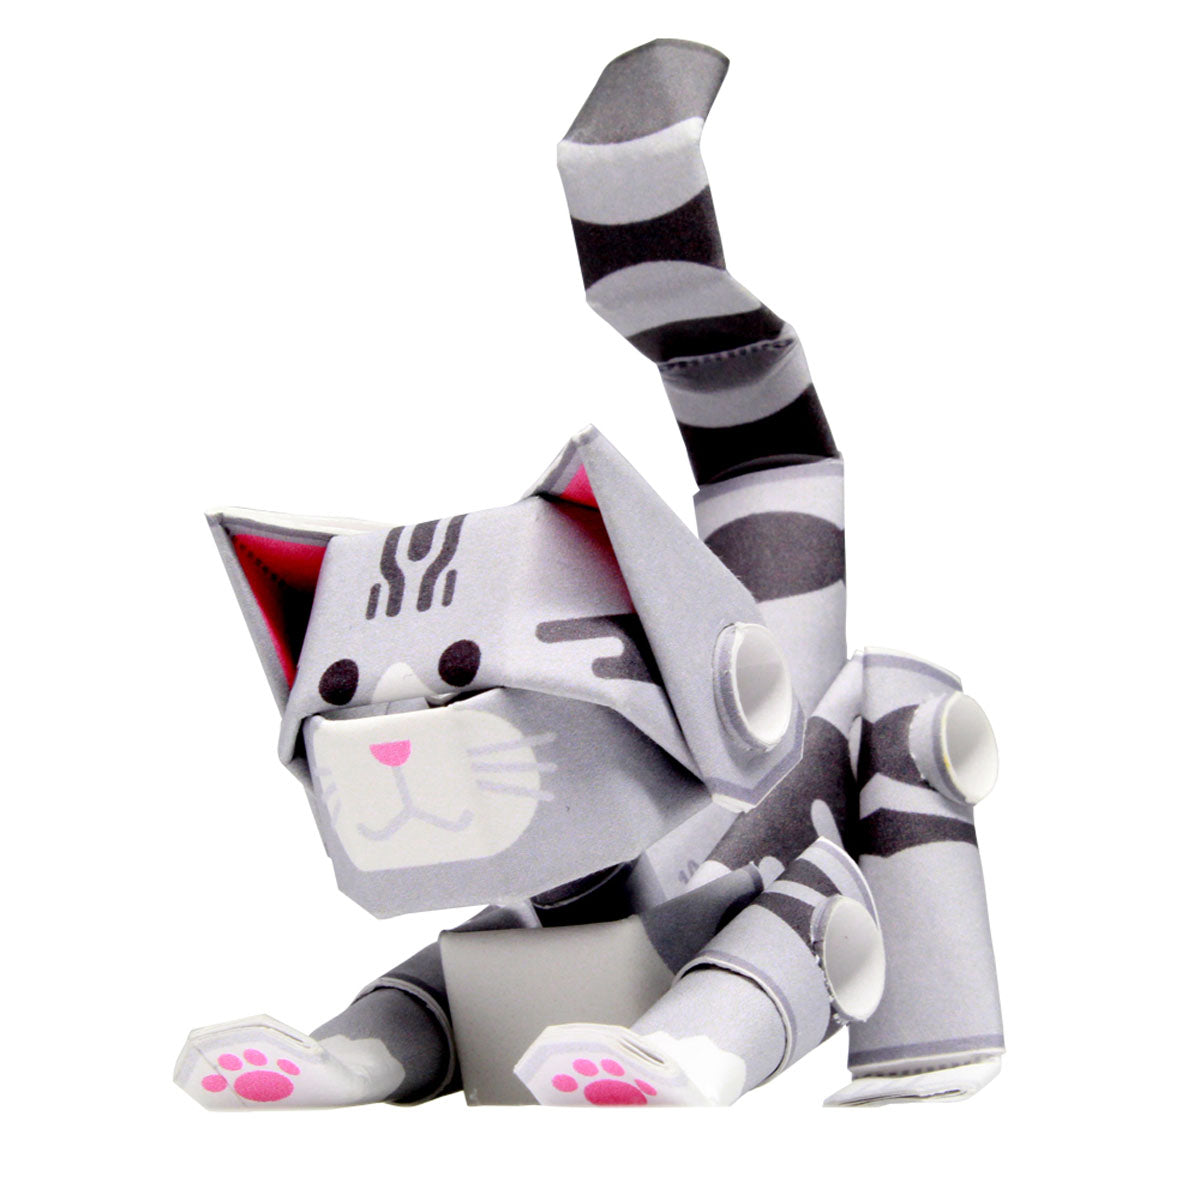 Silver tabby in prone from Make your own cat kit from Piperoid